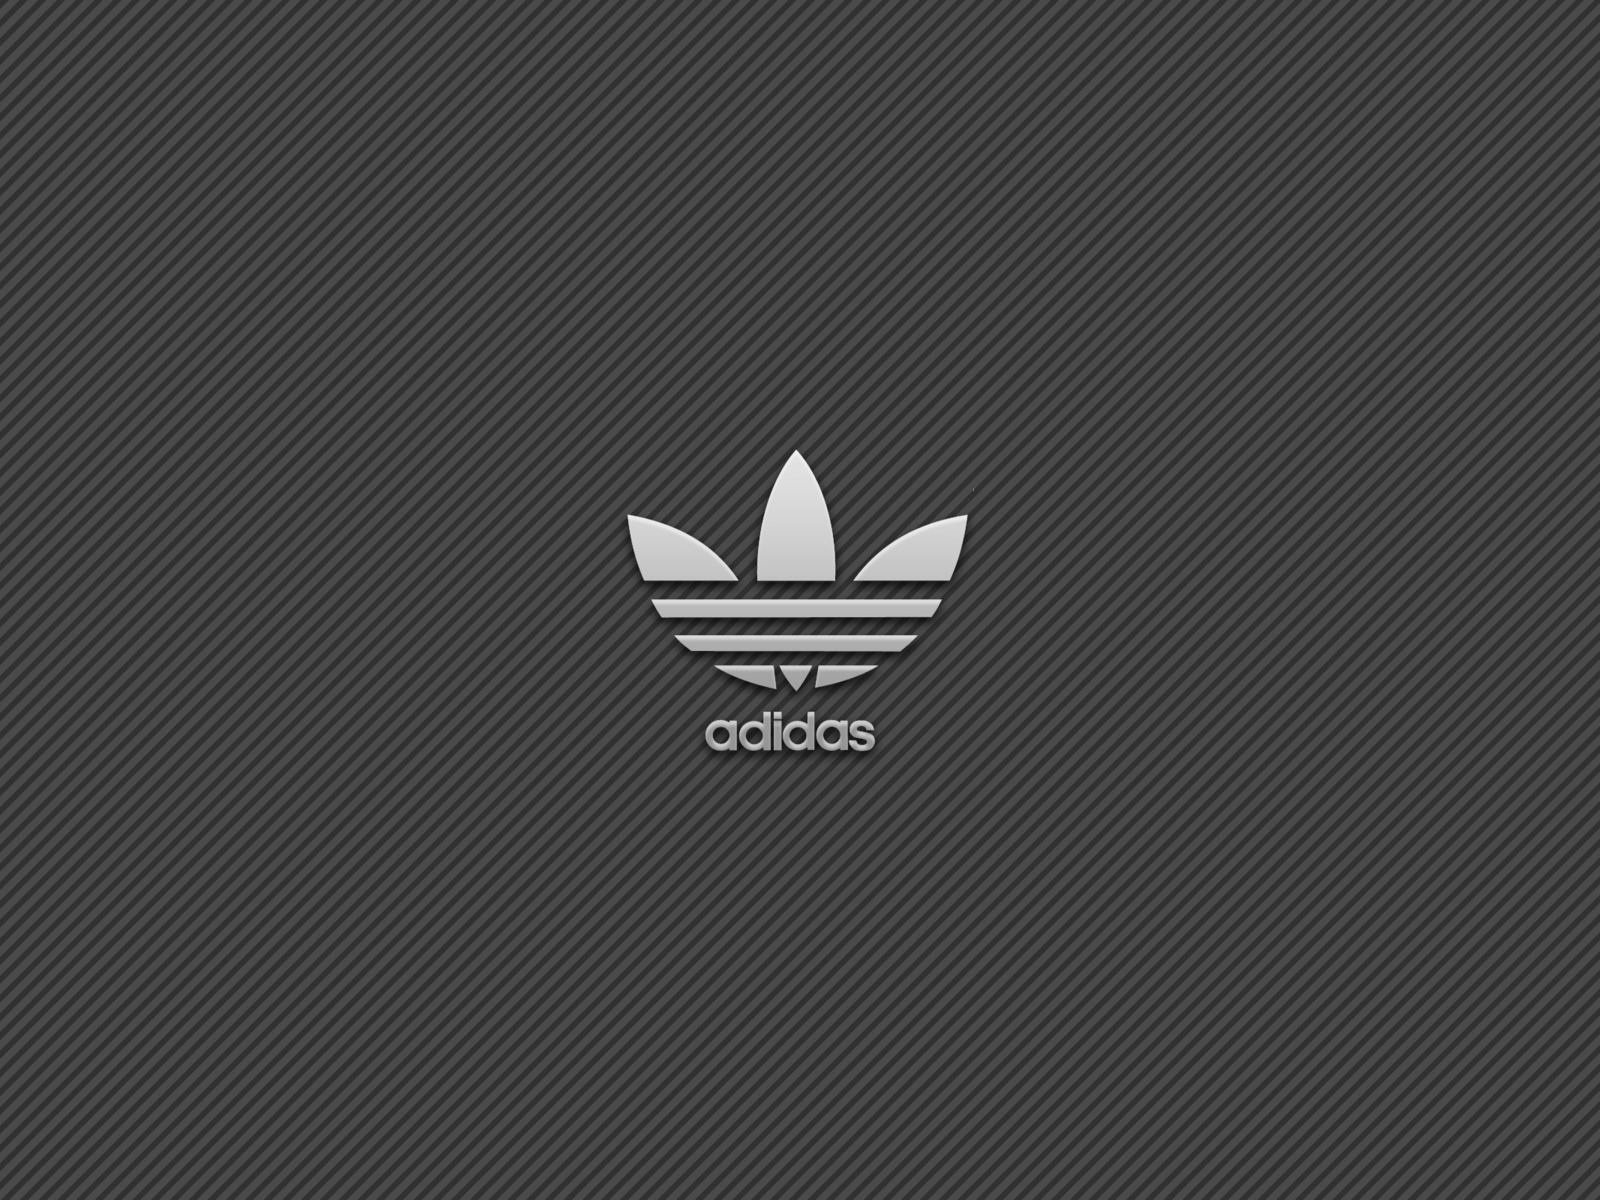 Adidas Simple Logo Background for 1600 x 1200 resolution